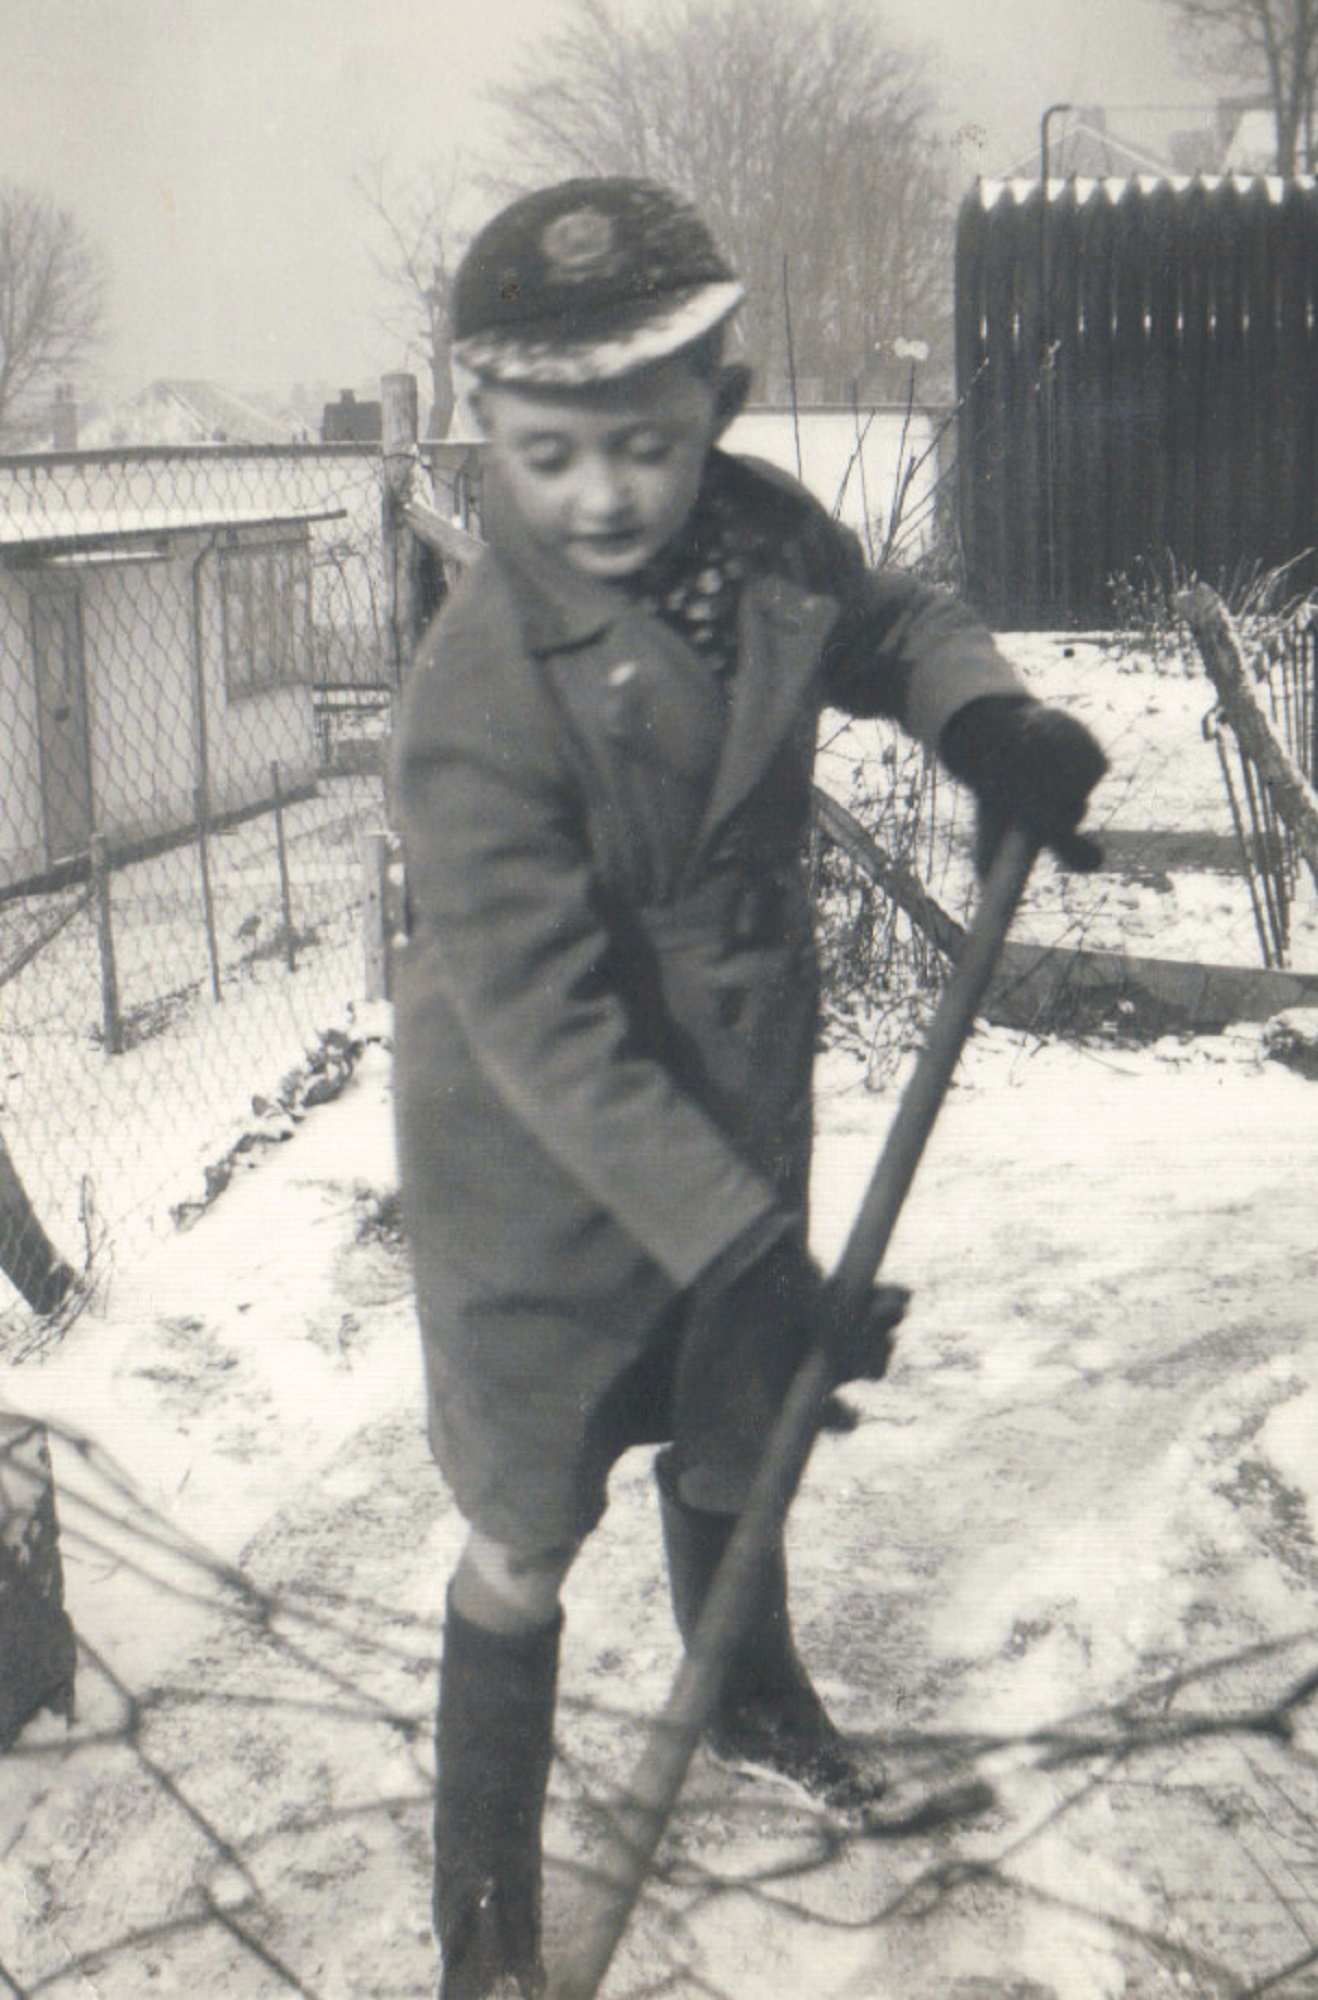 Terence shovelling snow outside his prefab in Dartmouth Park Hill, London N19